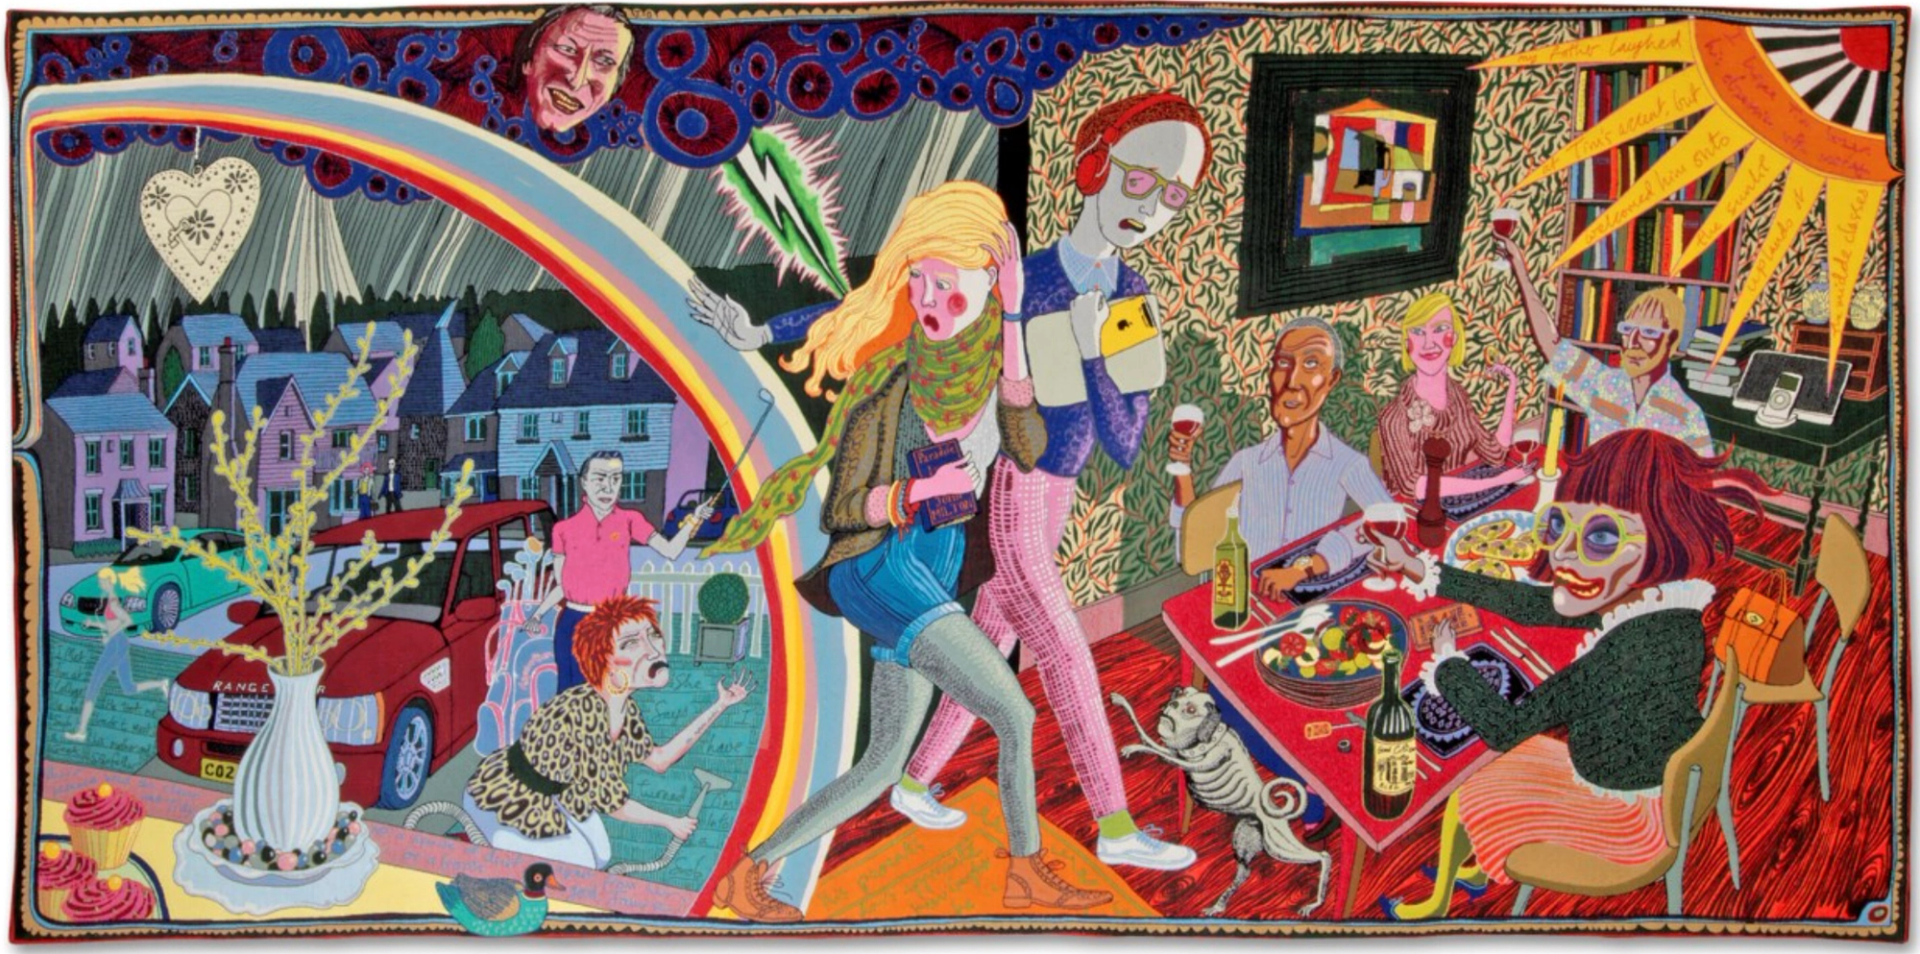 Tapestry by Grayson Perry, depicting a couple departing from an outdoor driveway into a dinner party.